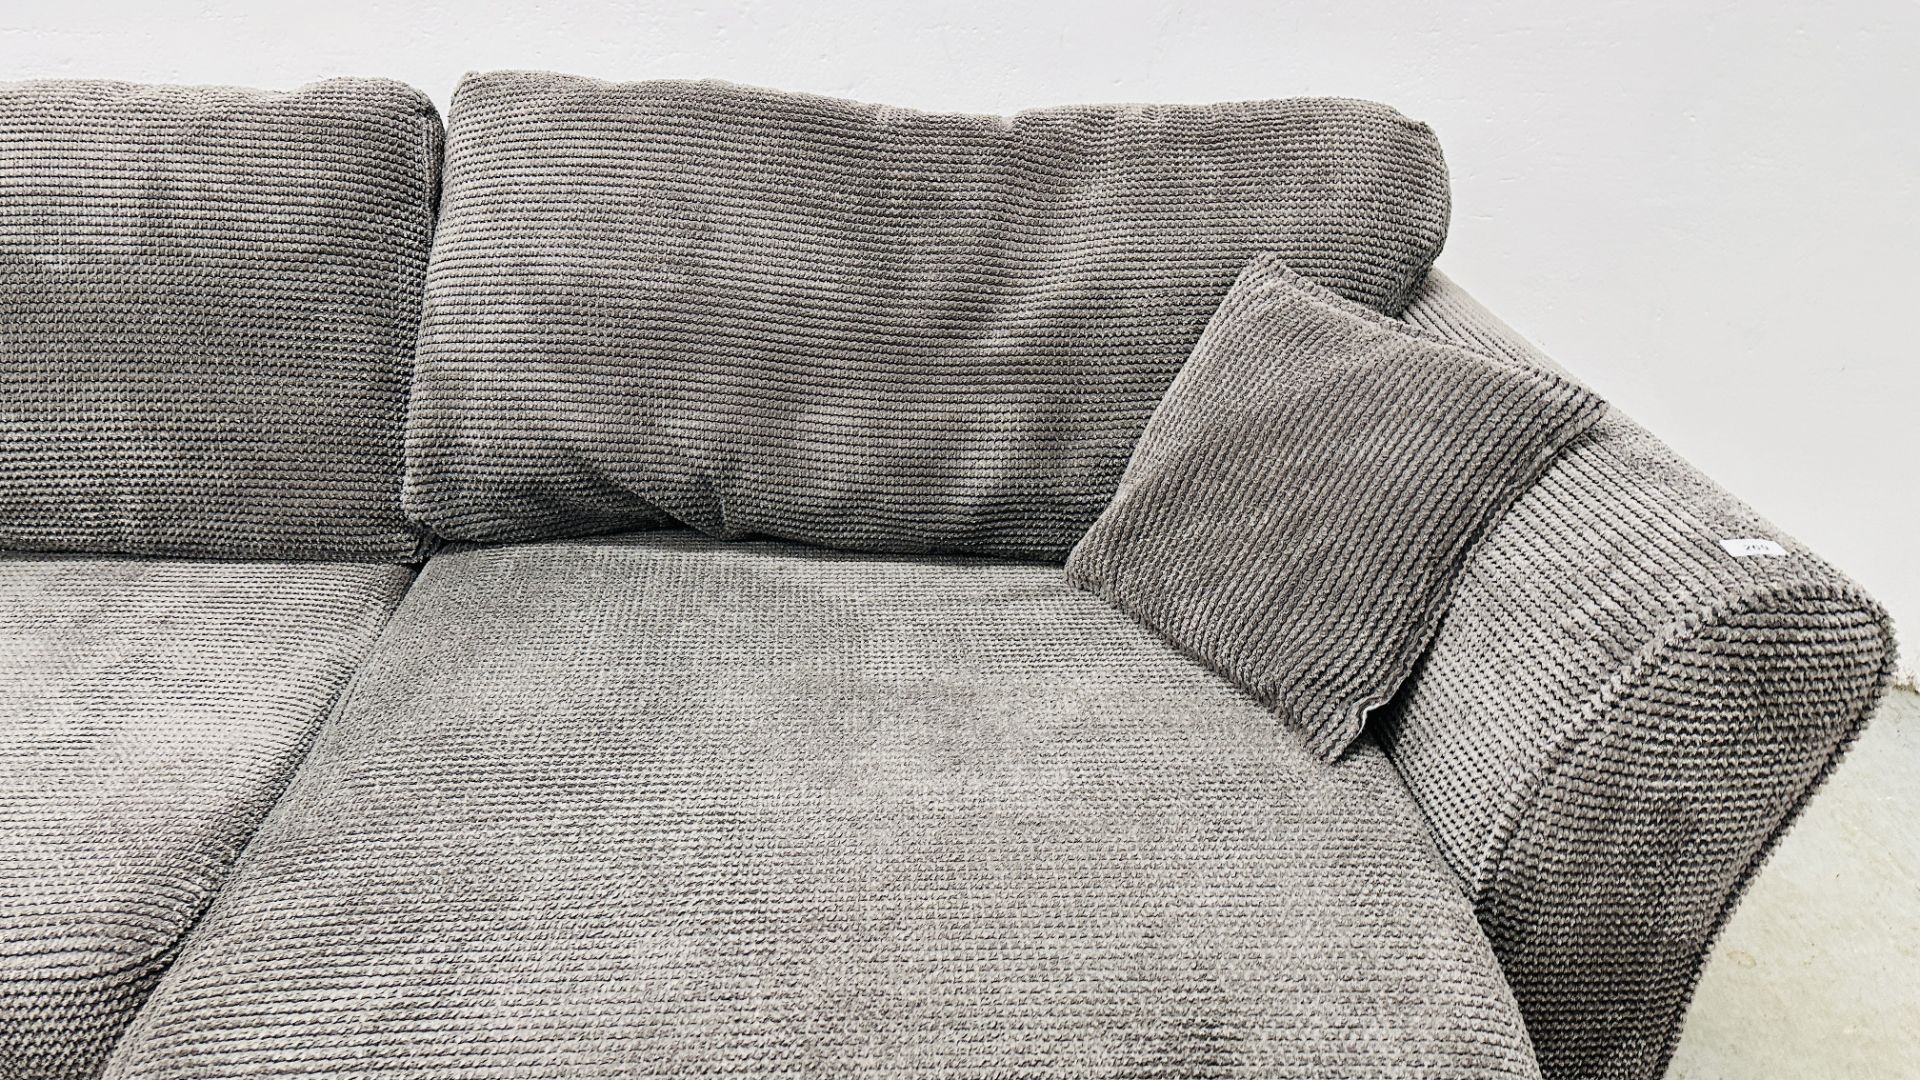 GOOD QUALITY DFS CORNER SOFA UPHOLSTERED IN CHARCOAL GREY. - Image 10 of 10